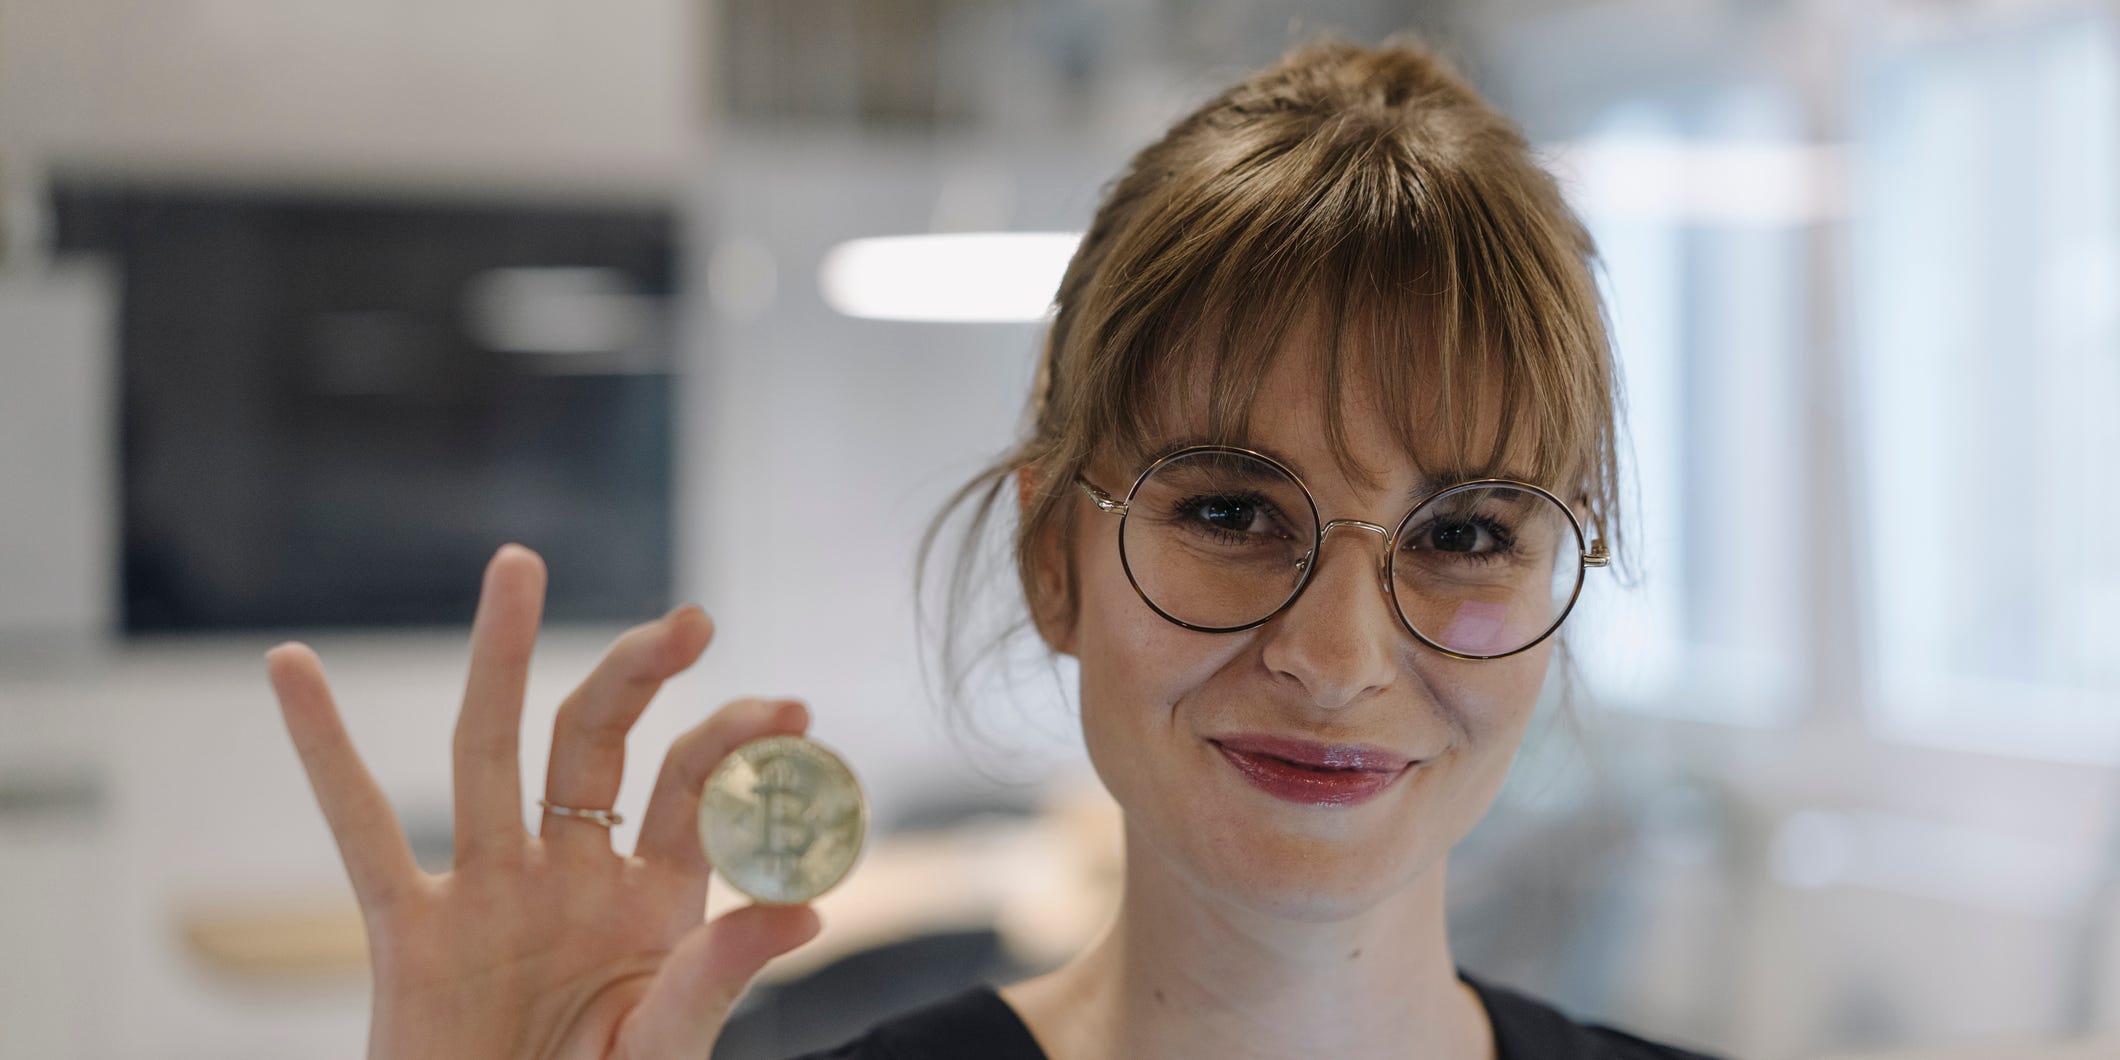 A woman standing in an office is holding a bitcoin in her hand.